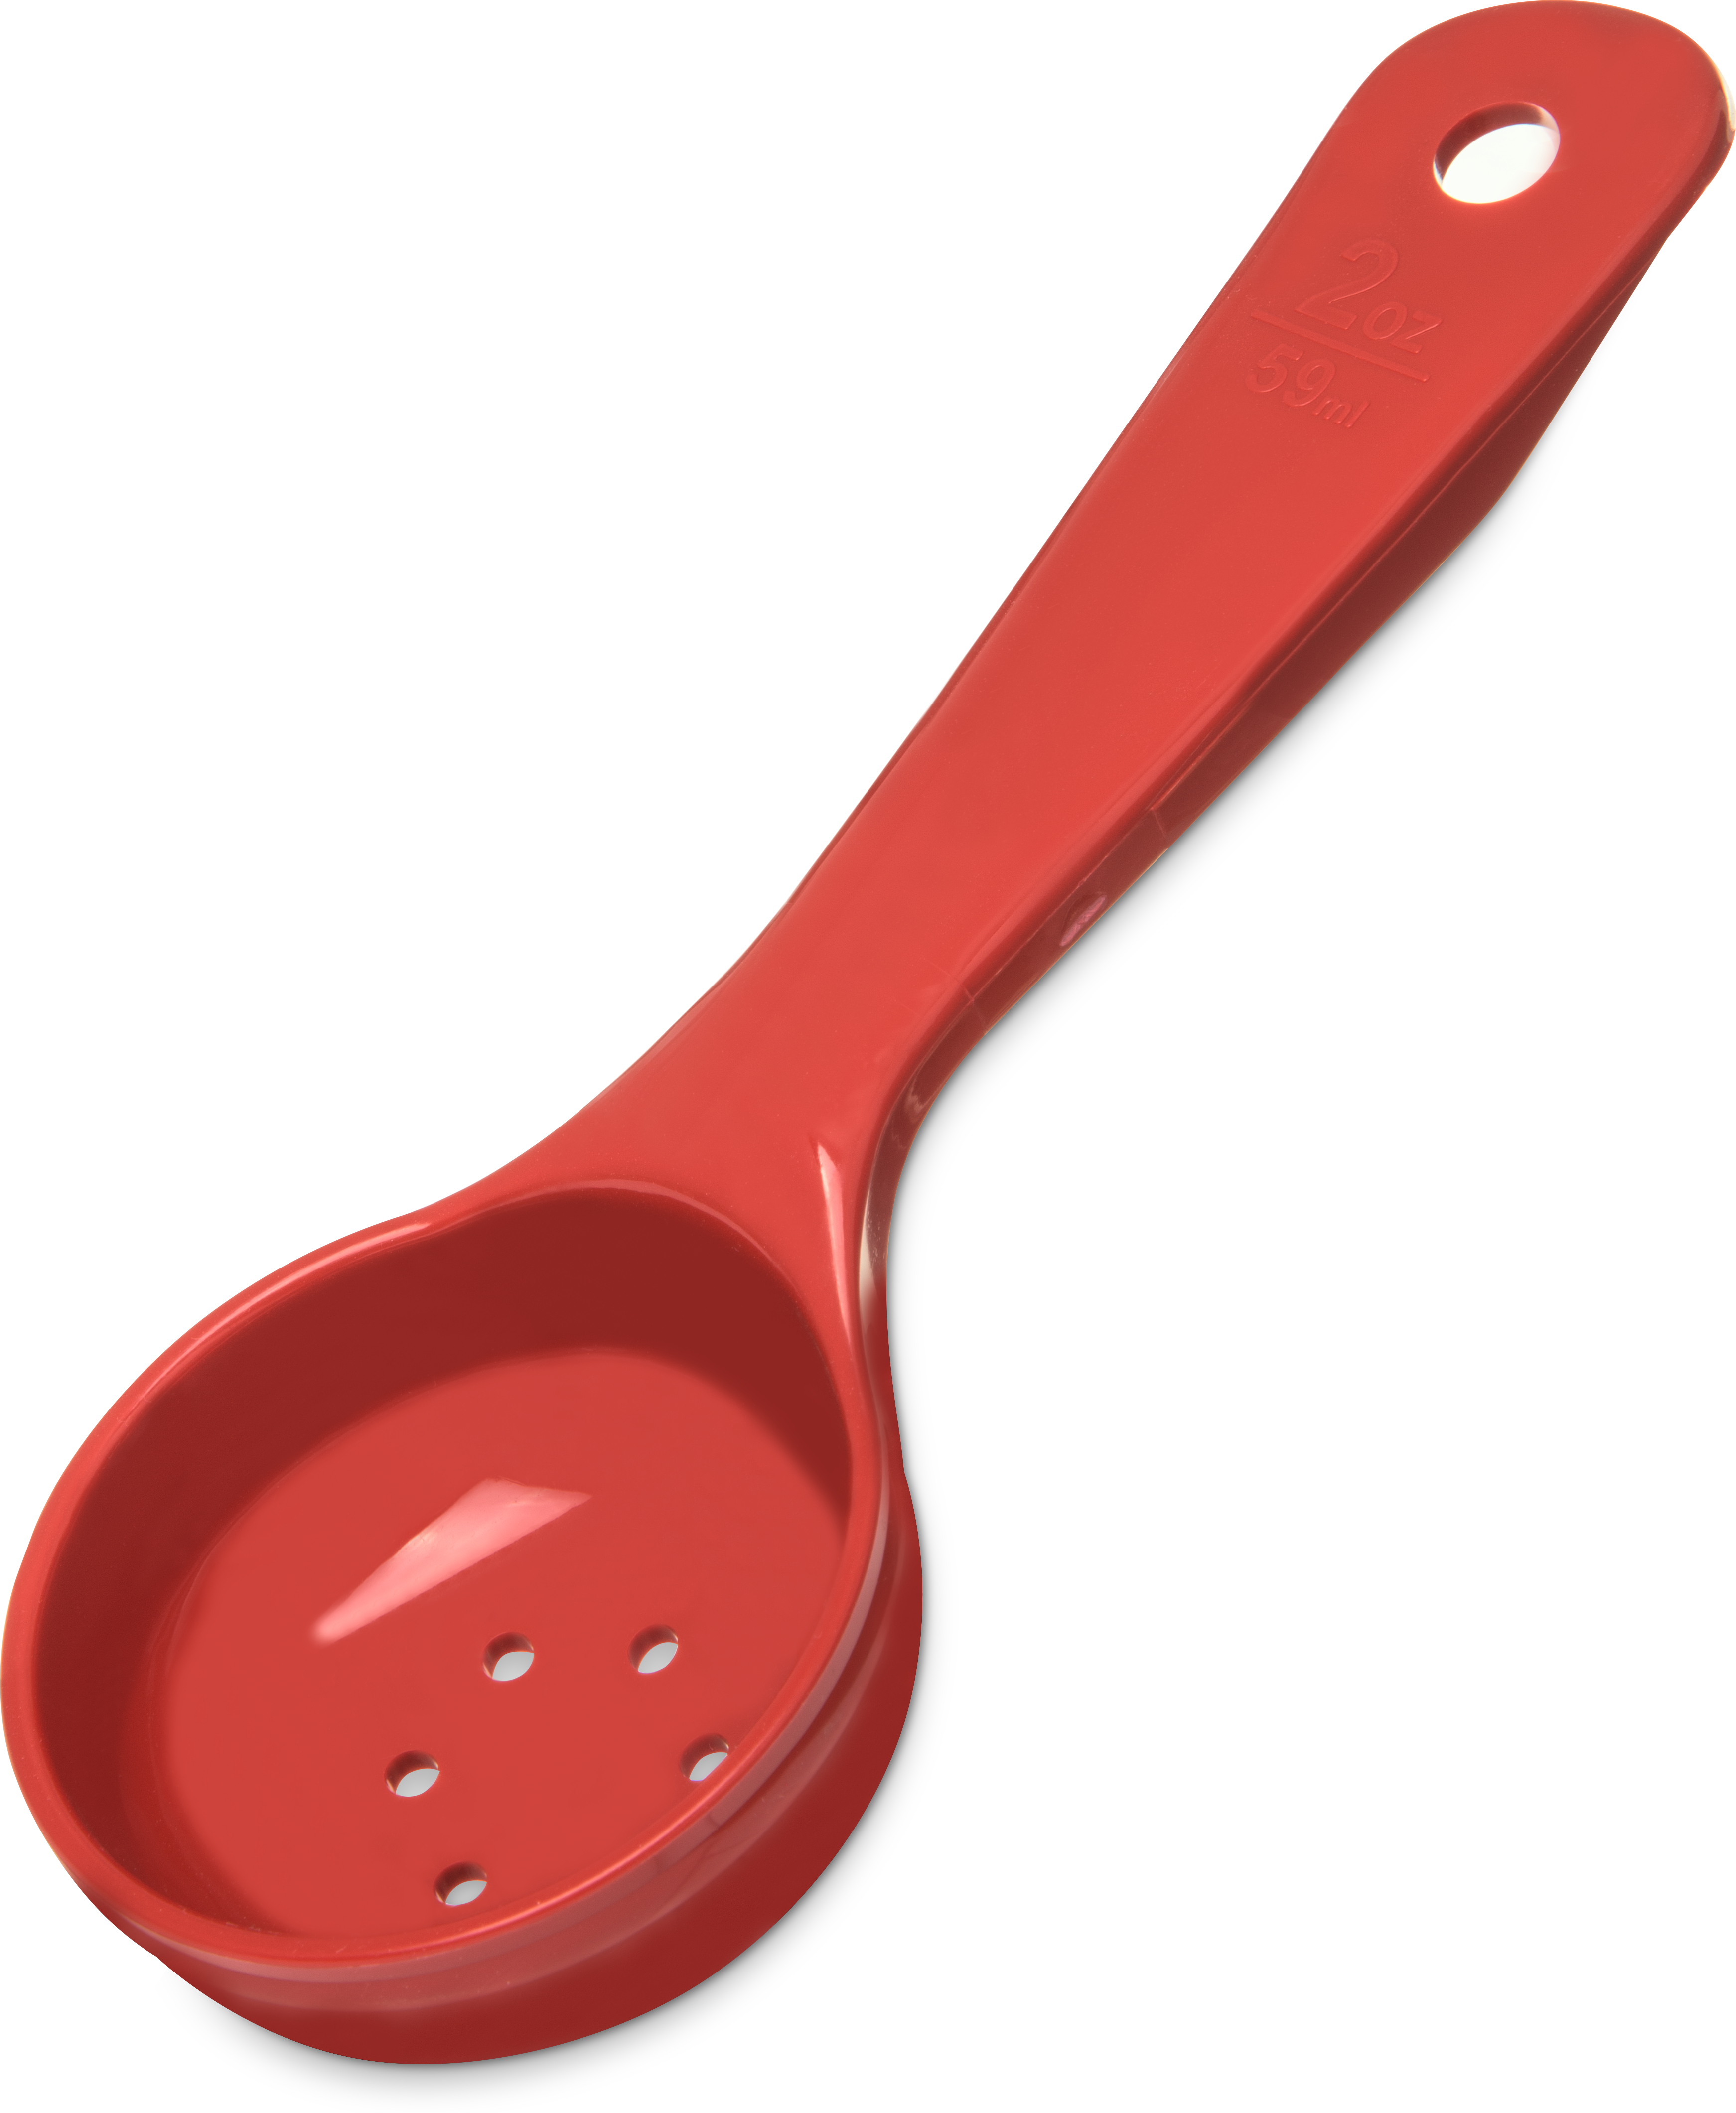 Measure Miser Perforated Short Handle 2 oz - Red